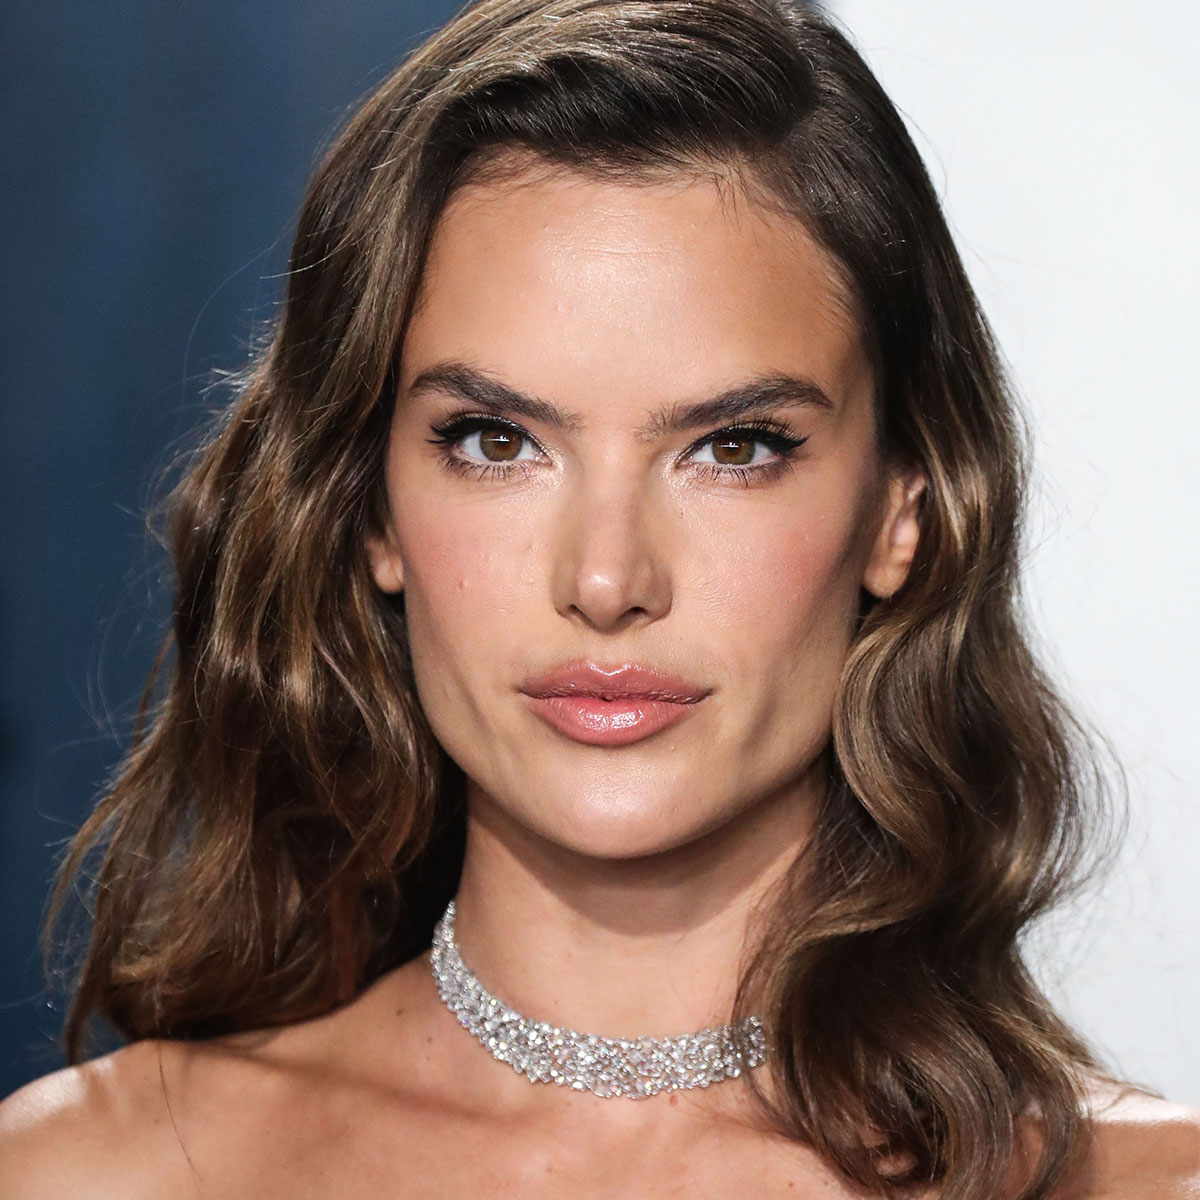 Alessandra Ambrosio Shows Off Her Ageless Beauty In A Colorful